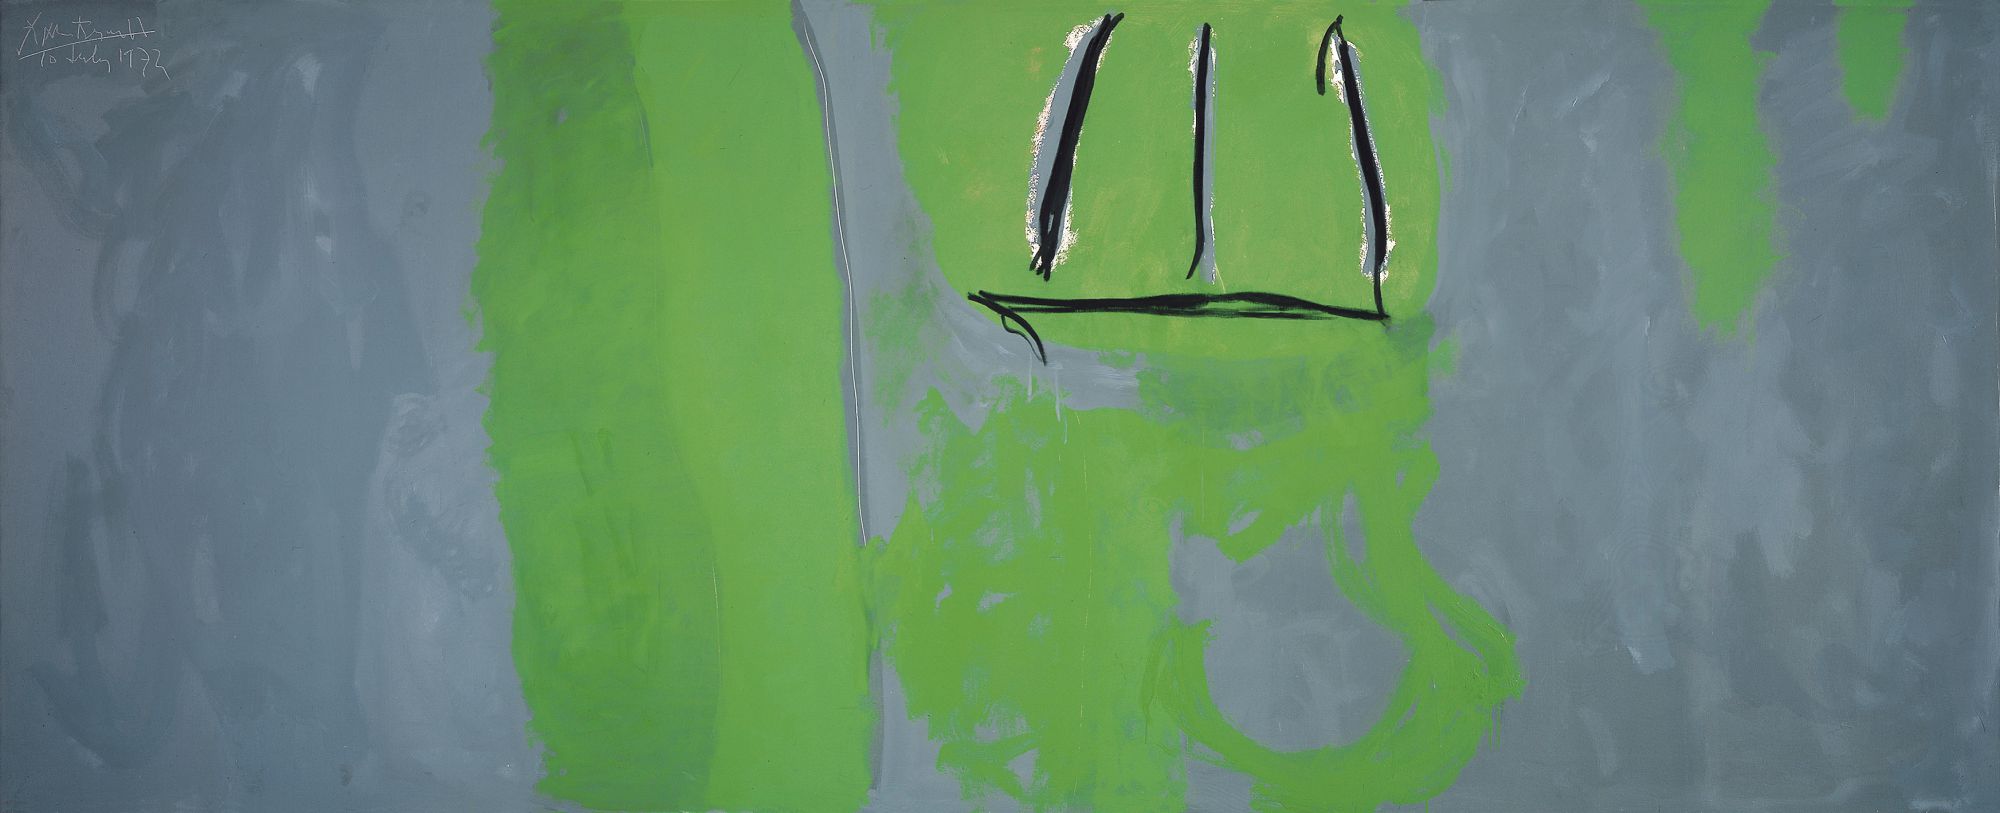 Riverrun, 1972/1973/1982–1983. Acrylic and charcoal on canvas, 60 x 150 inches (152.4 x 381 cm)